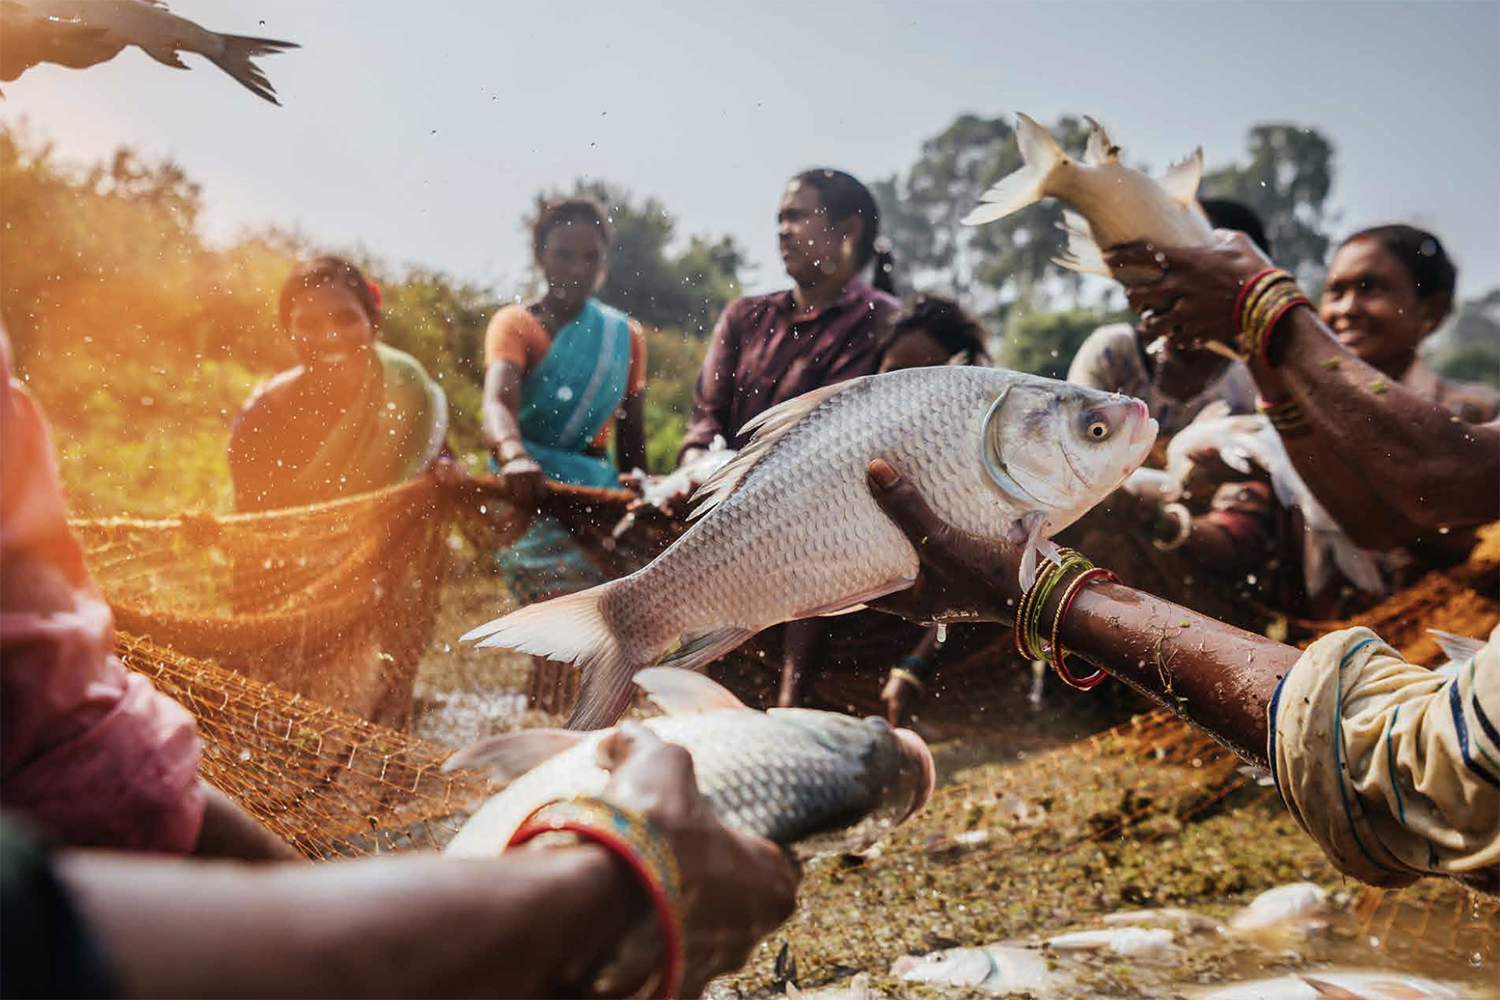 They know better than men how to protect their environment and people': How  focusing on women farmers is boosting food security in India - Responsible  Seafood Advocate